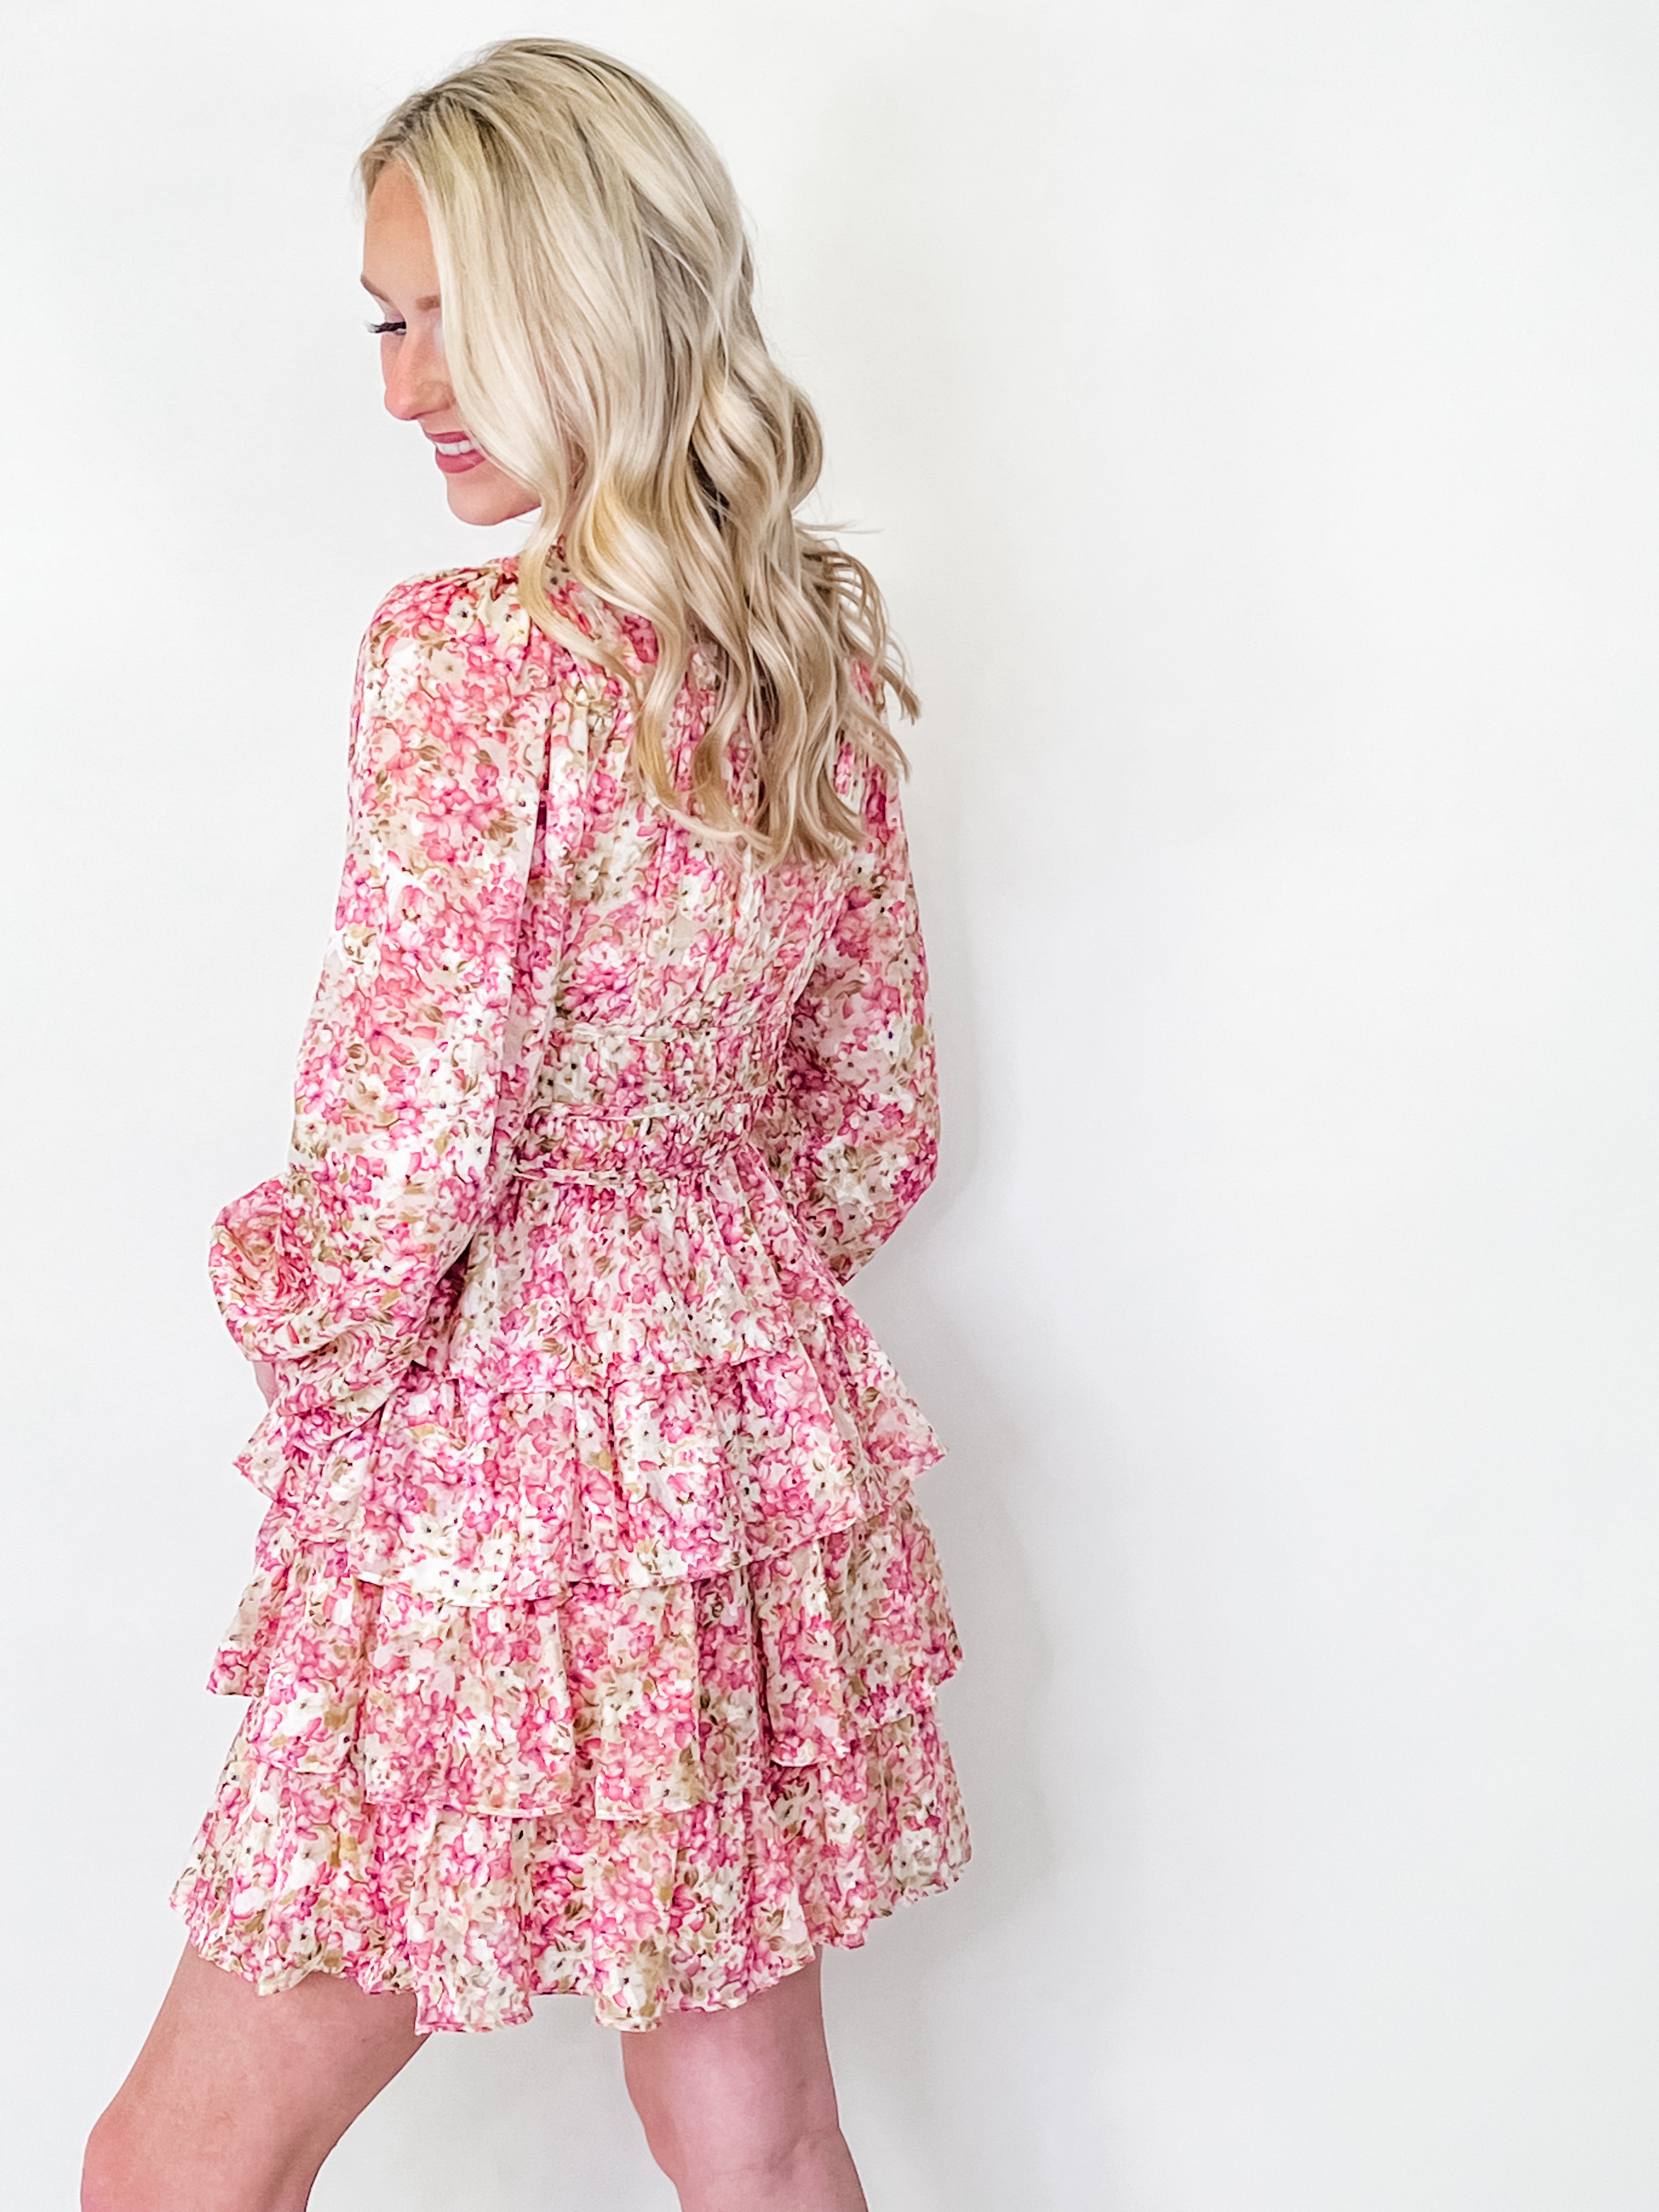 Kyleigh - Floral Tiered Layers Mini Dress